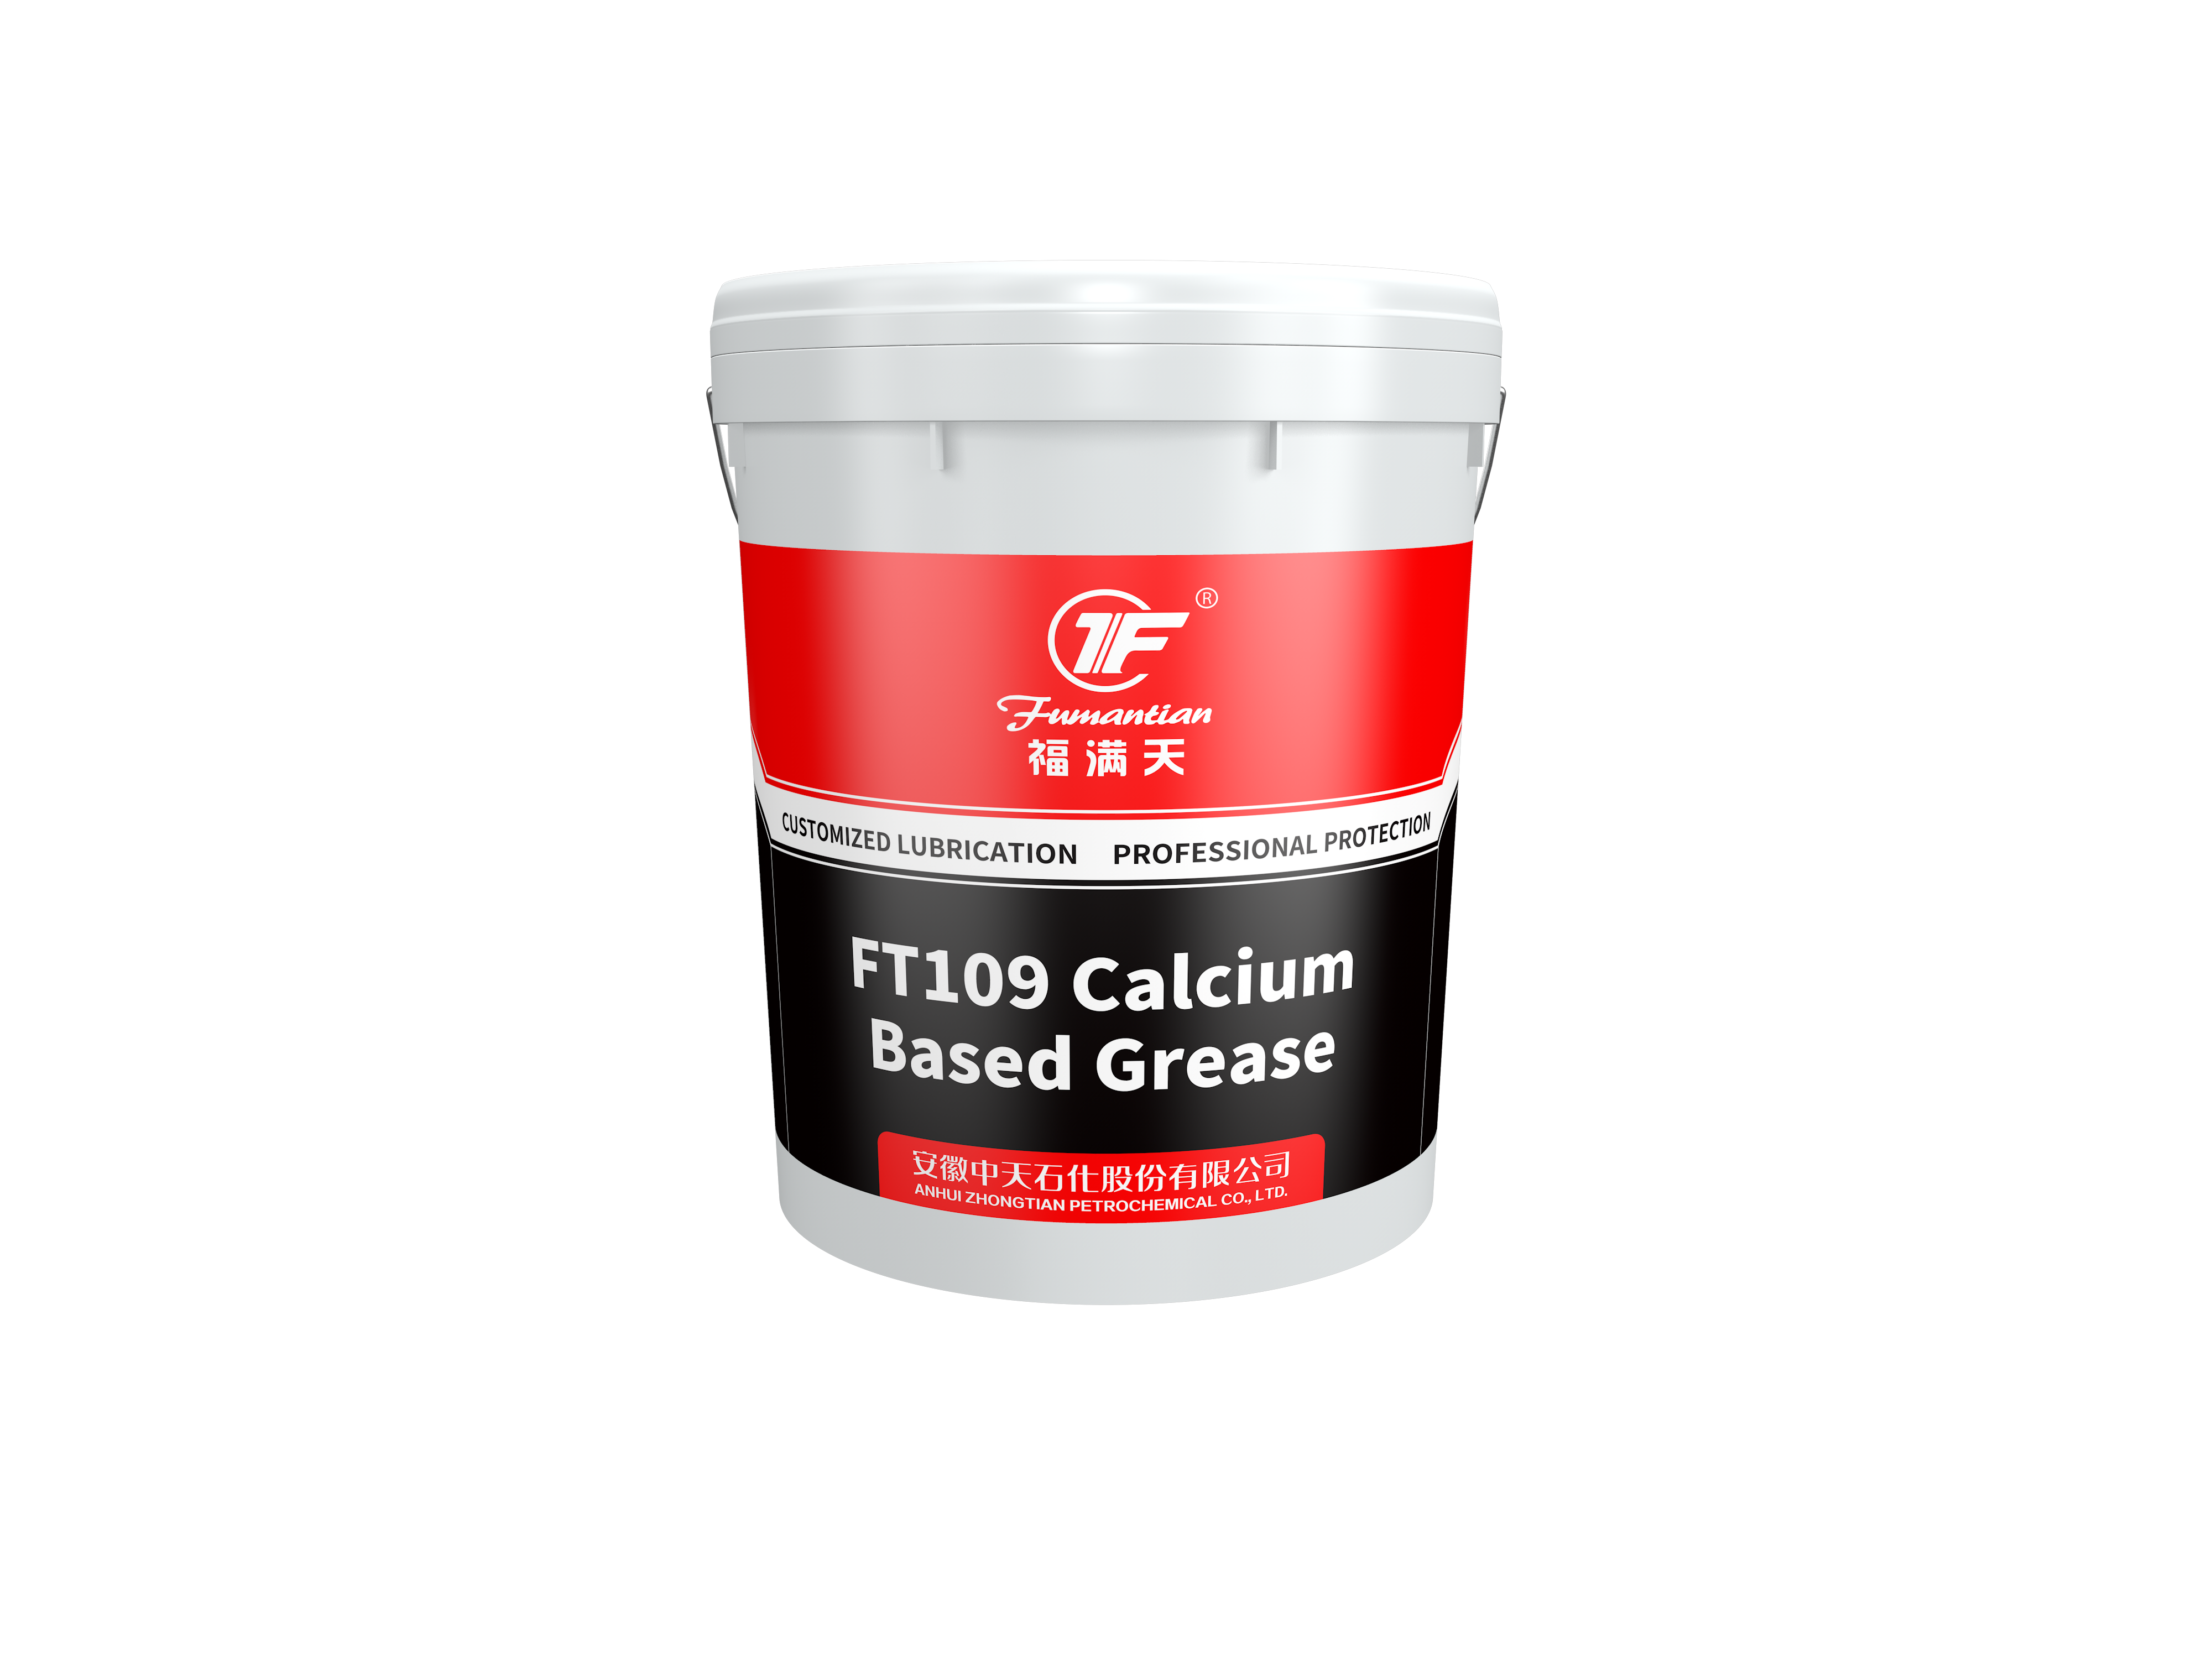 FT109 Calcium Based Grease